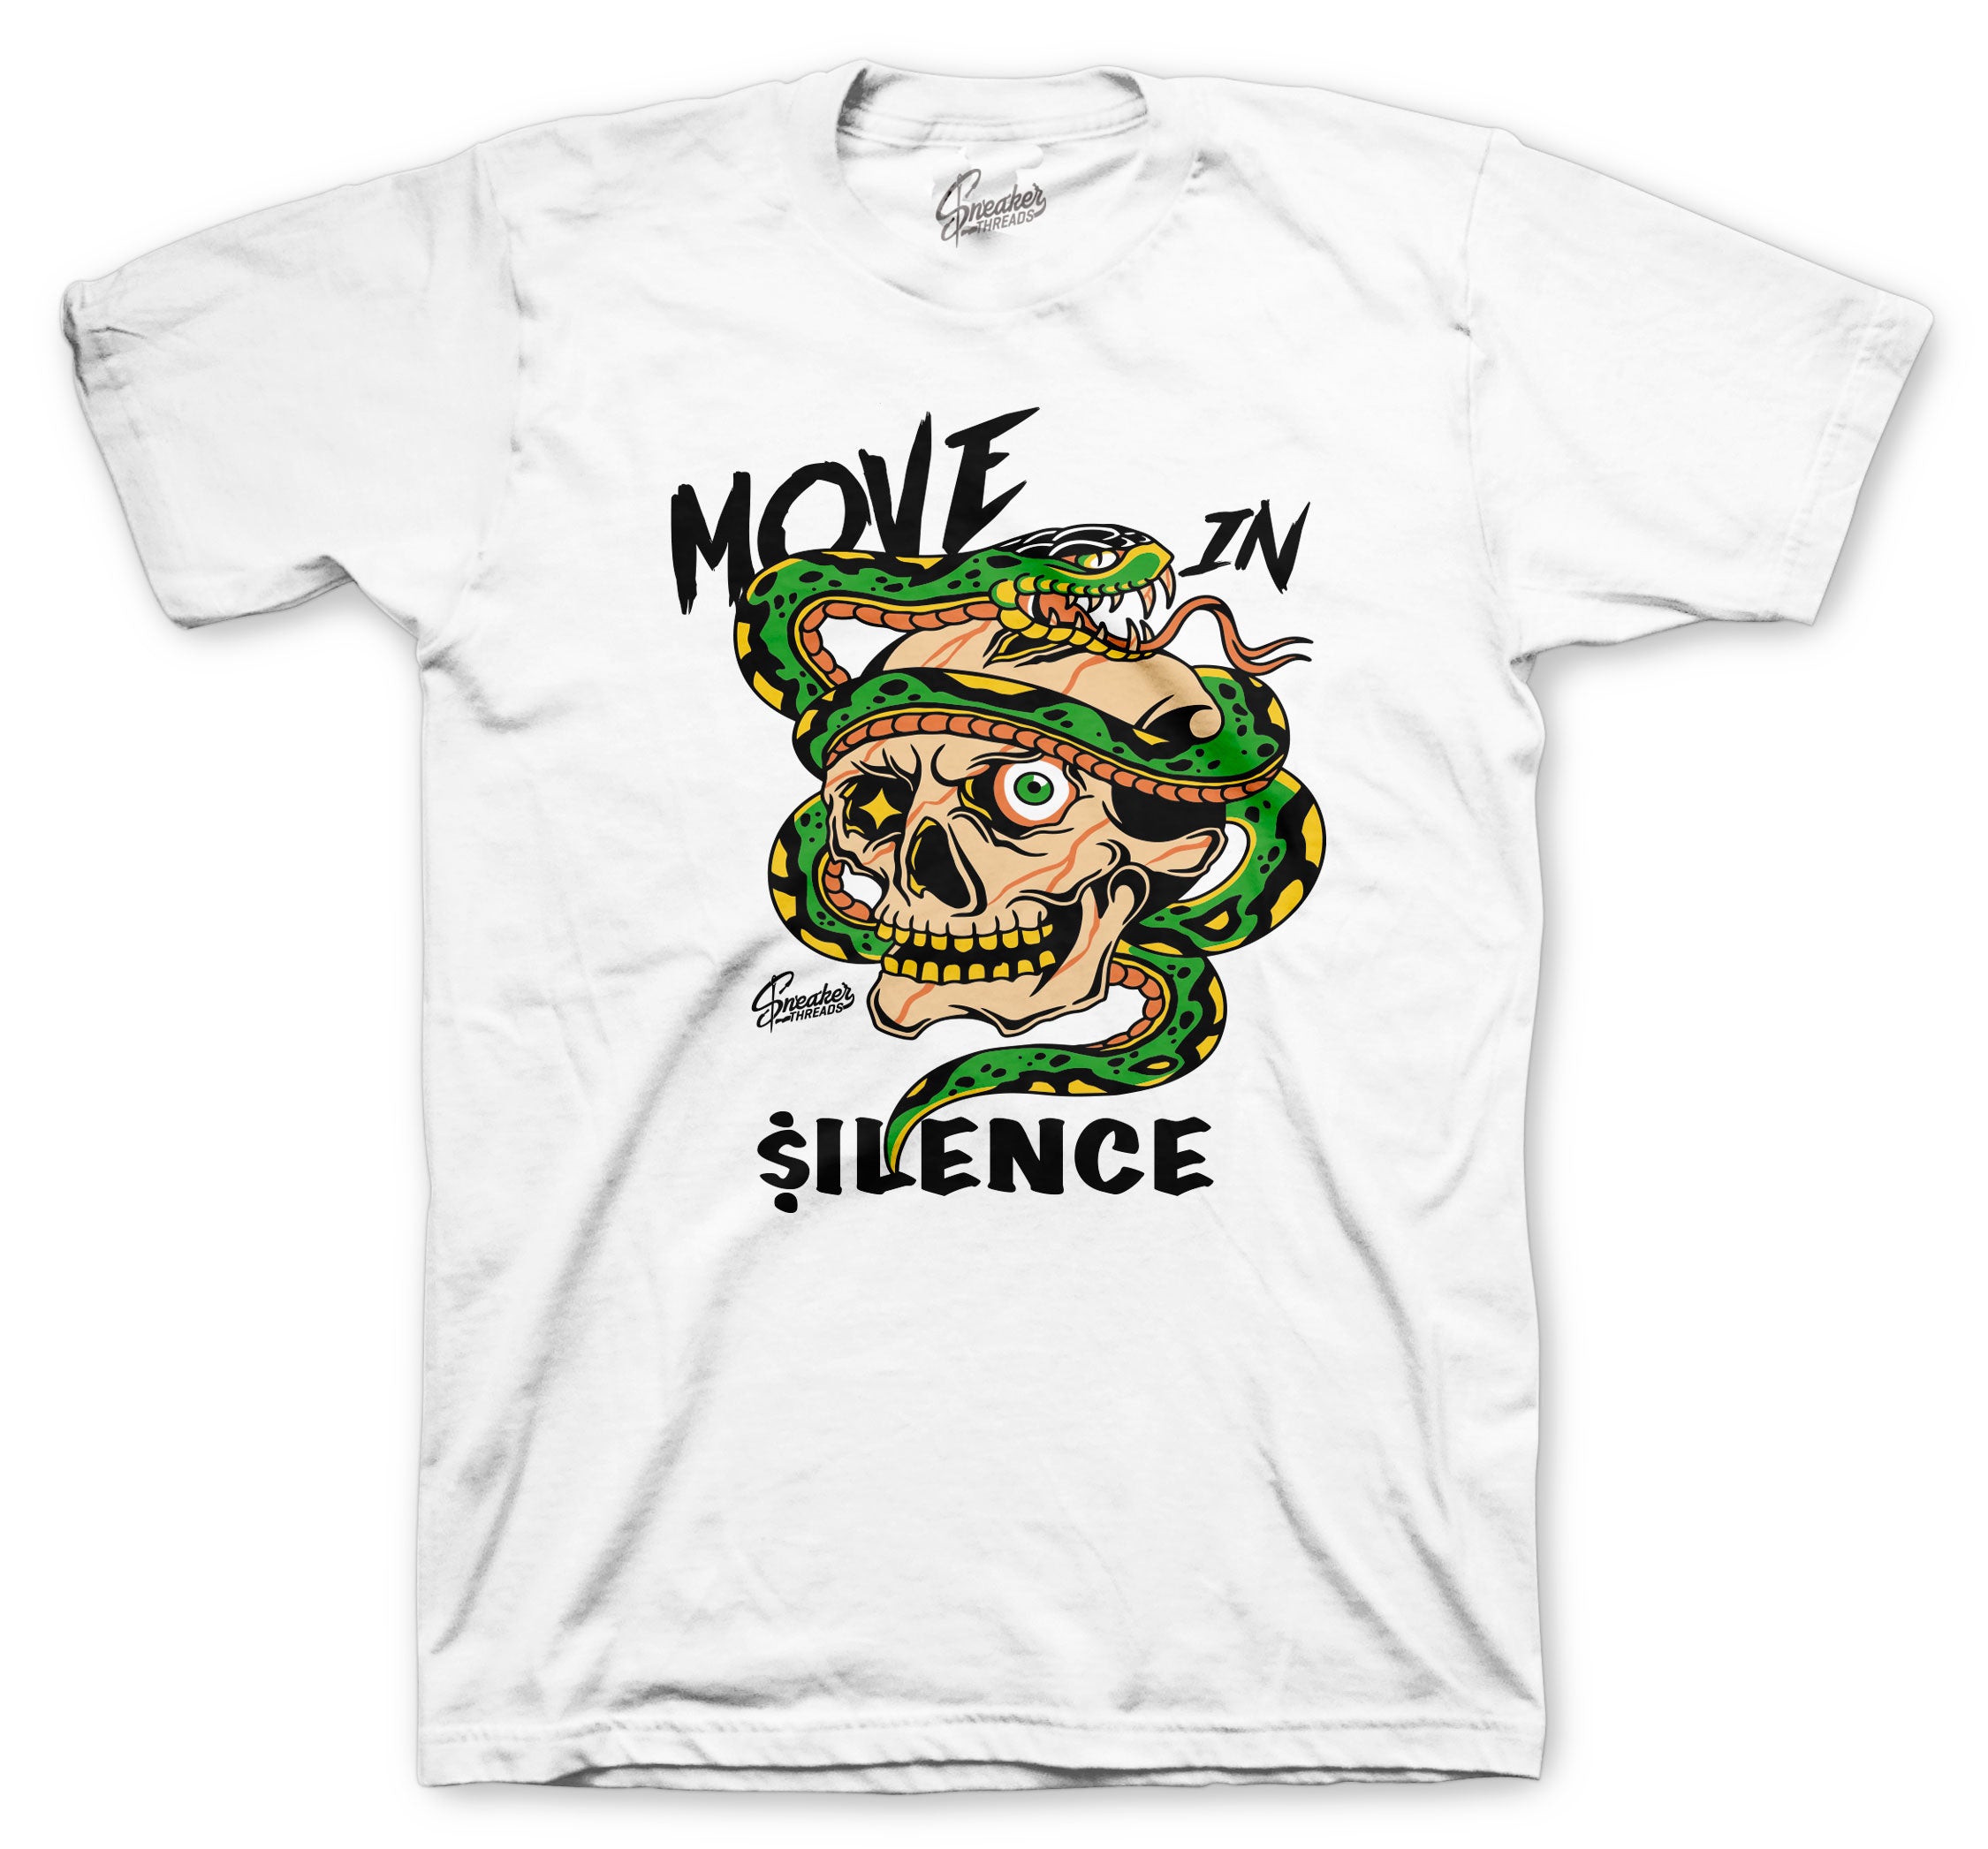 Retro 10 Seattle Shirt - Move In Silence - White